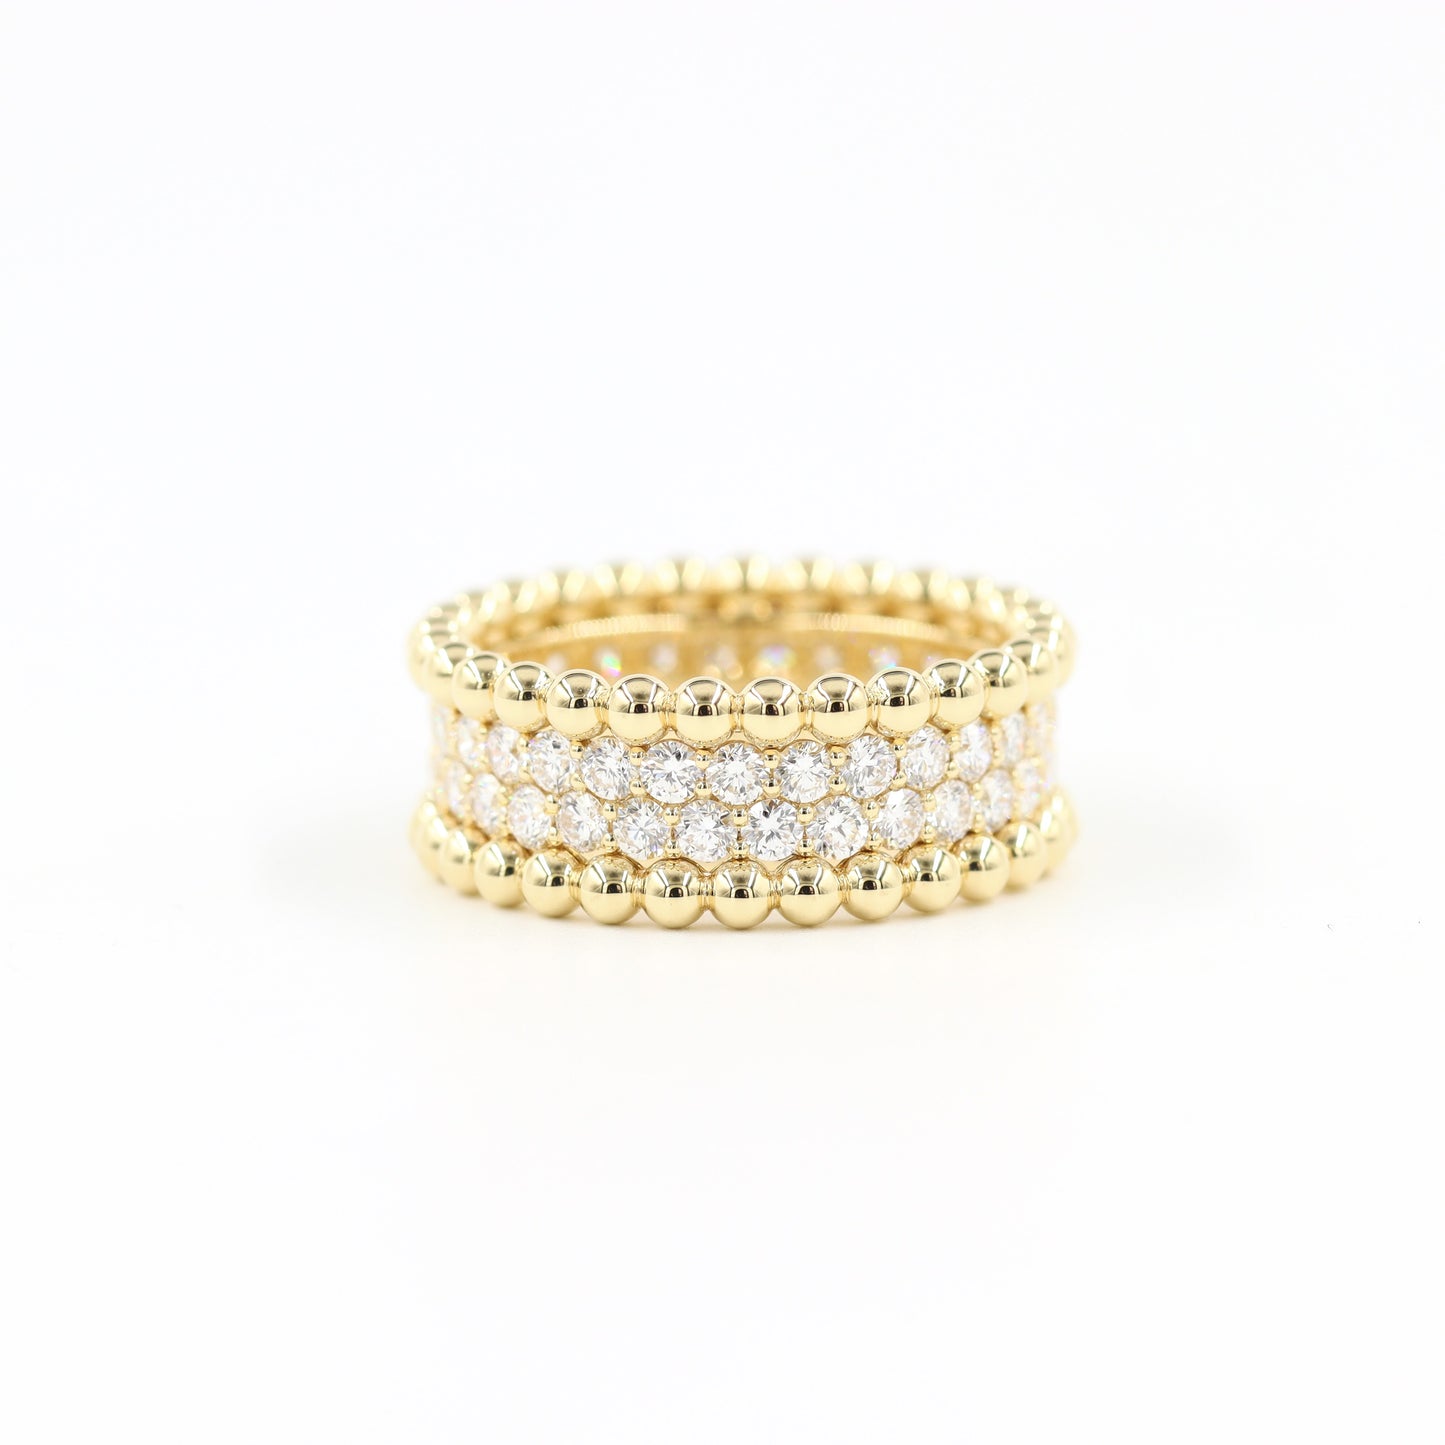 Round Diamond Double Row Eternity Ring/ 14K gold Unique Wedding Band/ Double Bead Ring/ Delicate Antique Anniversary Diamond ring/ Gift for her